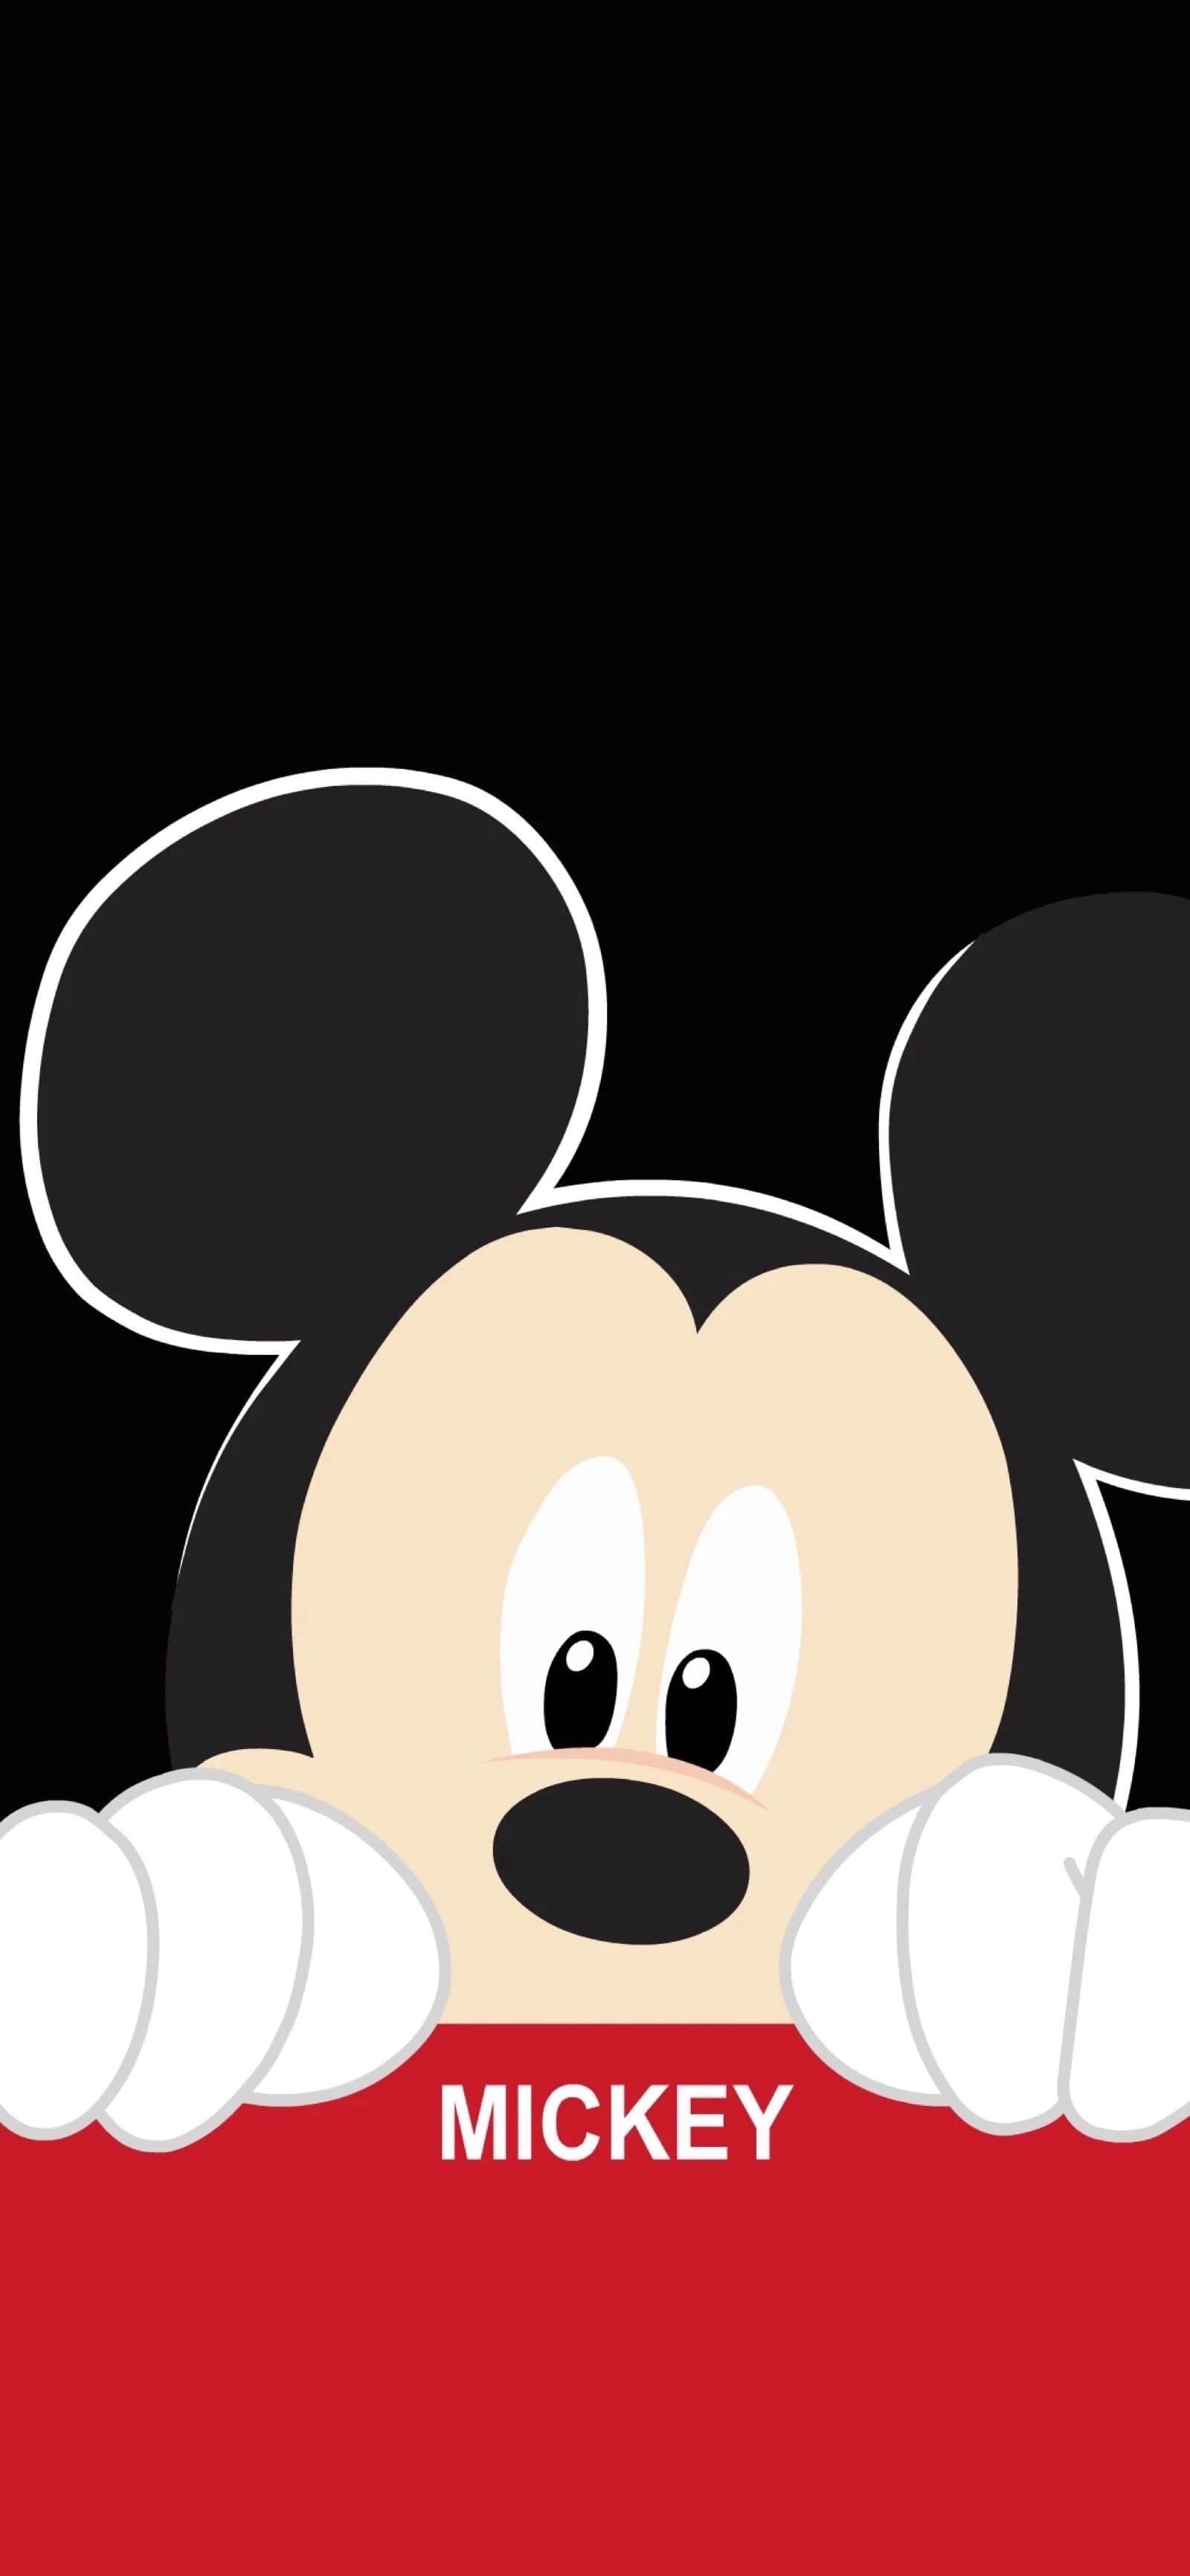 Mickey mouse with his hands over a red background - Mickey Mouse